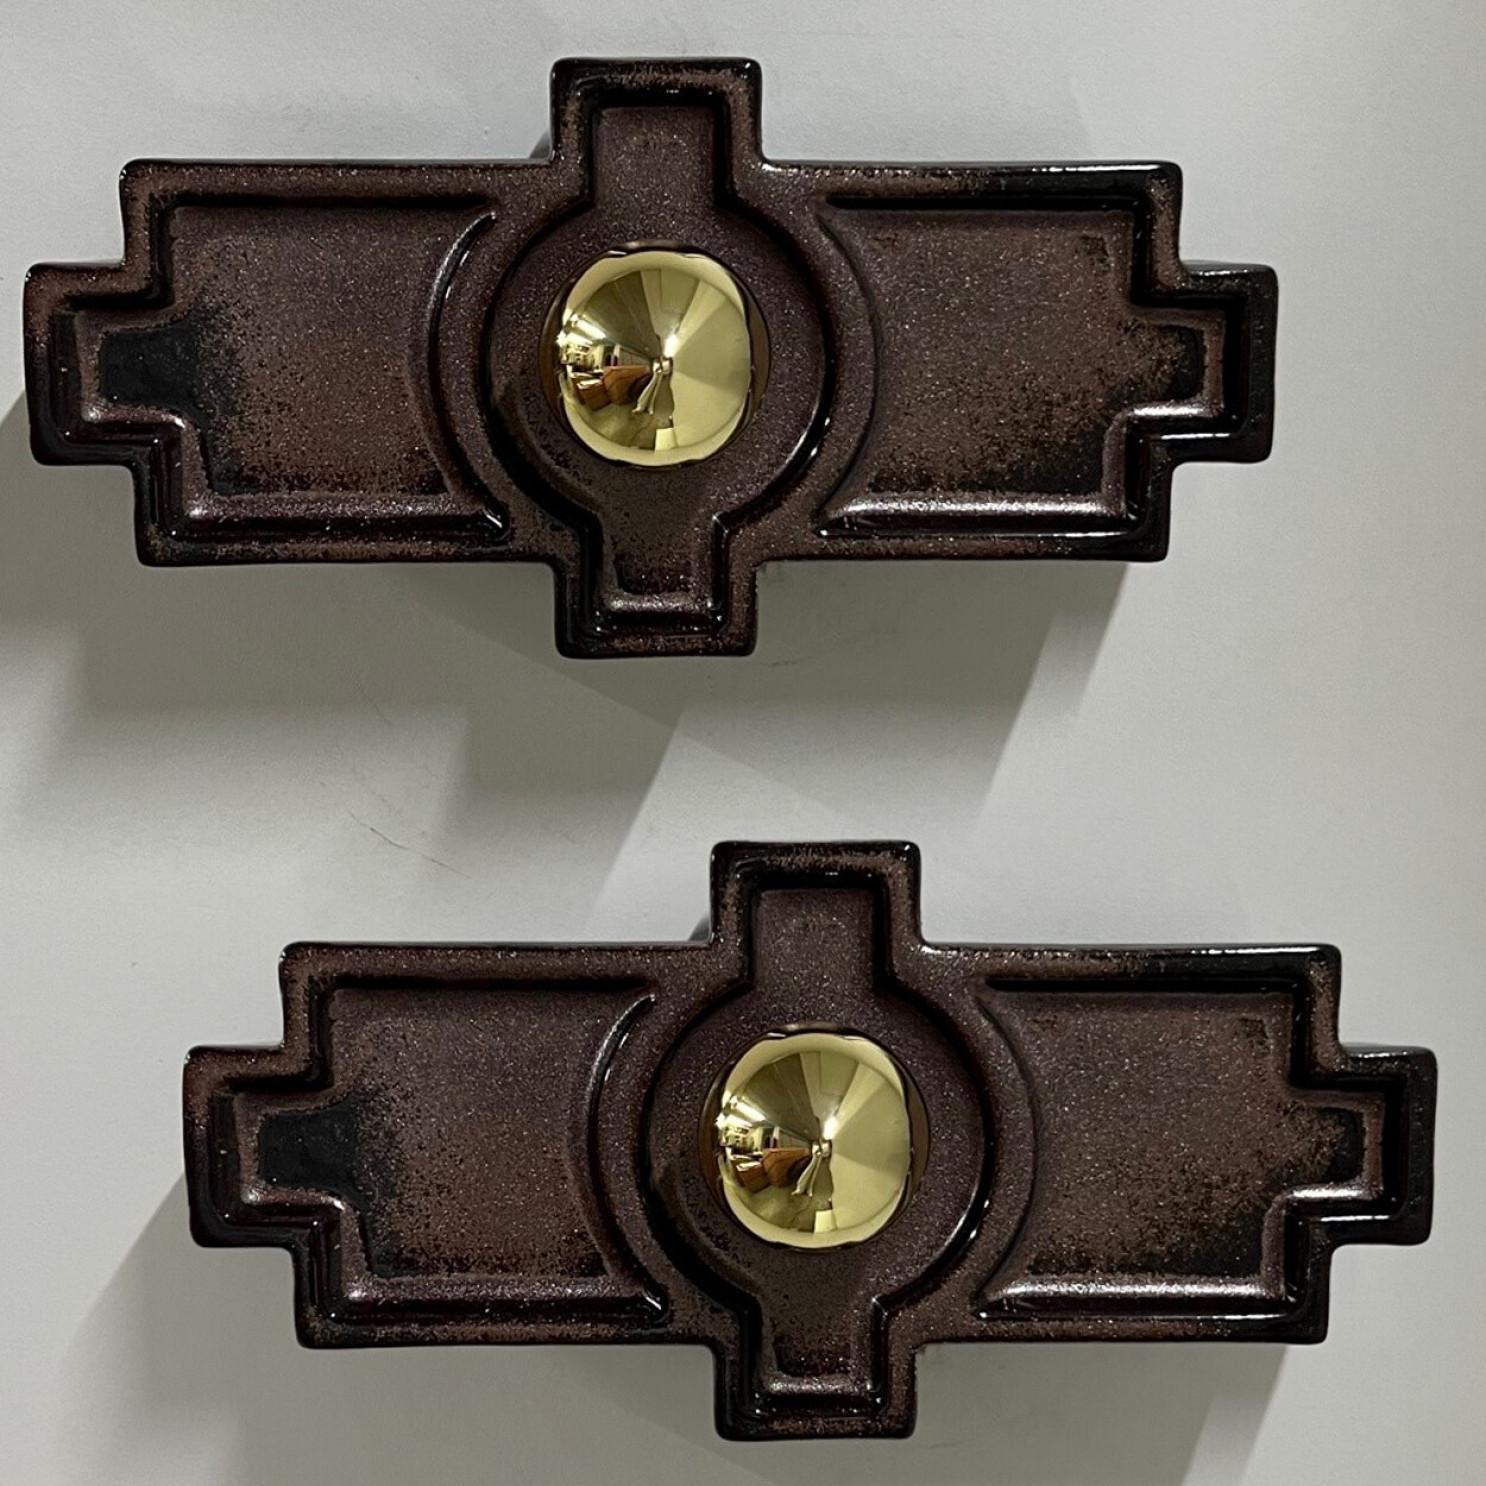 Rectangular brown ceramic wall lights in Fat Lava style. Manufactured in Germany in the 1970s.

The glaze has a brown color gradient. They can be placed horizontally or vertically.

We used gold light bulbs (see images), but silver amber or clear